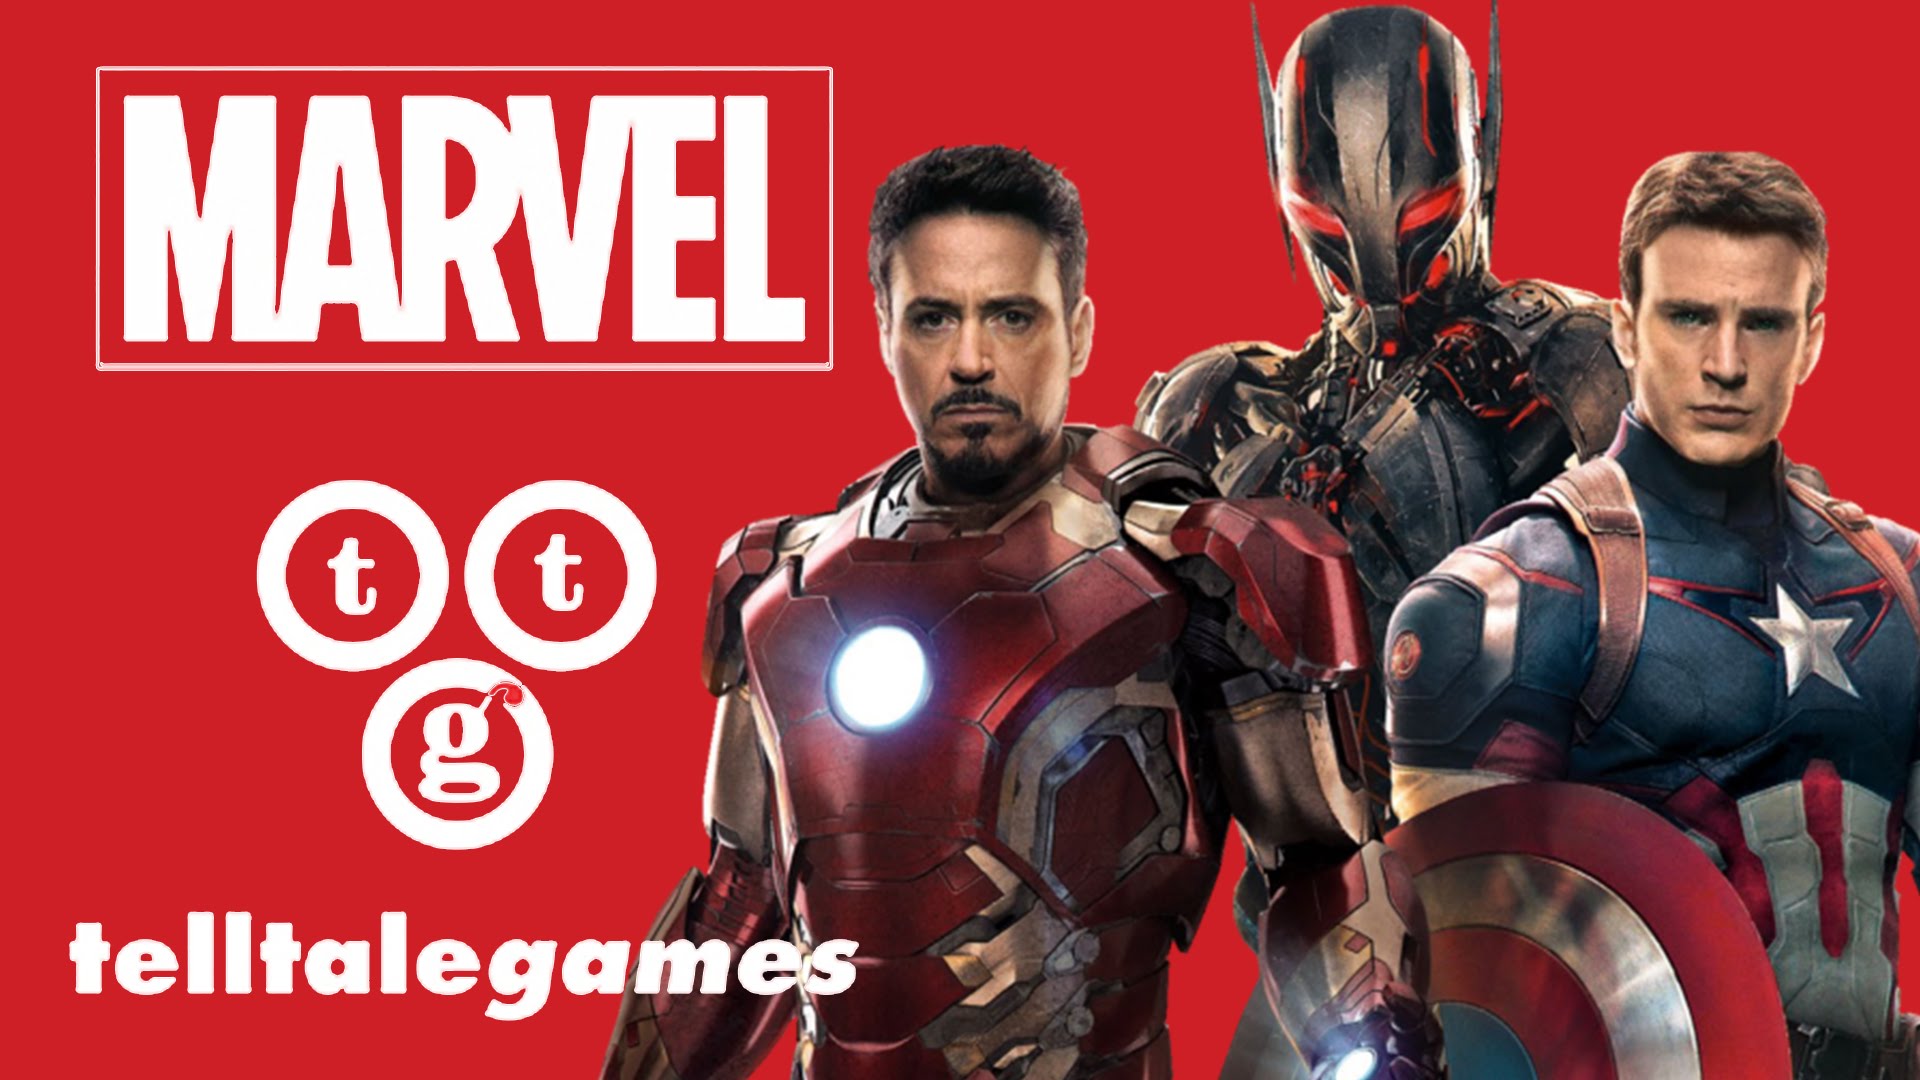 Telltale Games and Marvel